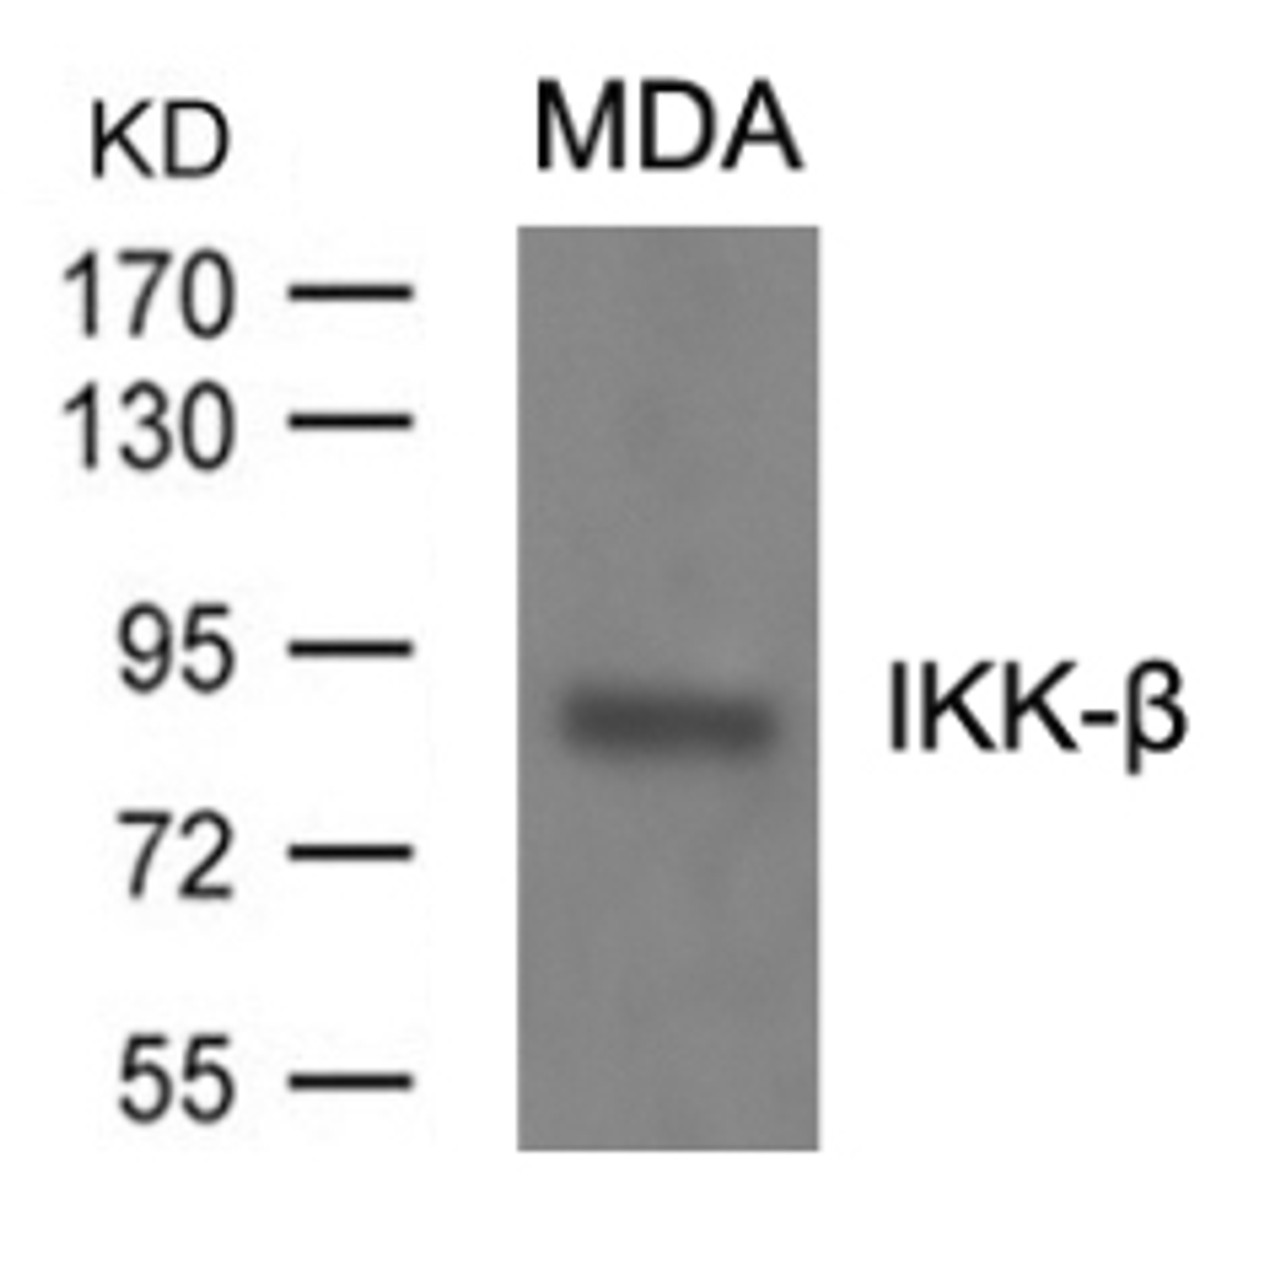 Western blot analysis of lysed extracts from MDA cells using IKK-&#946; (Ab-199) .